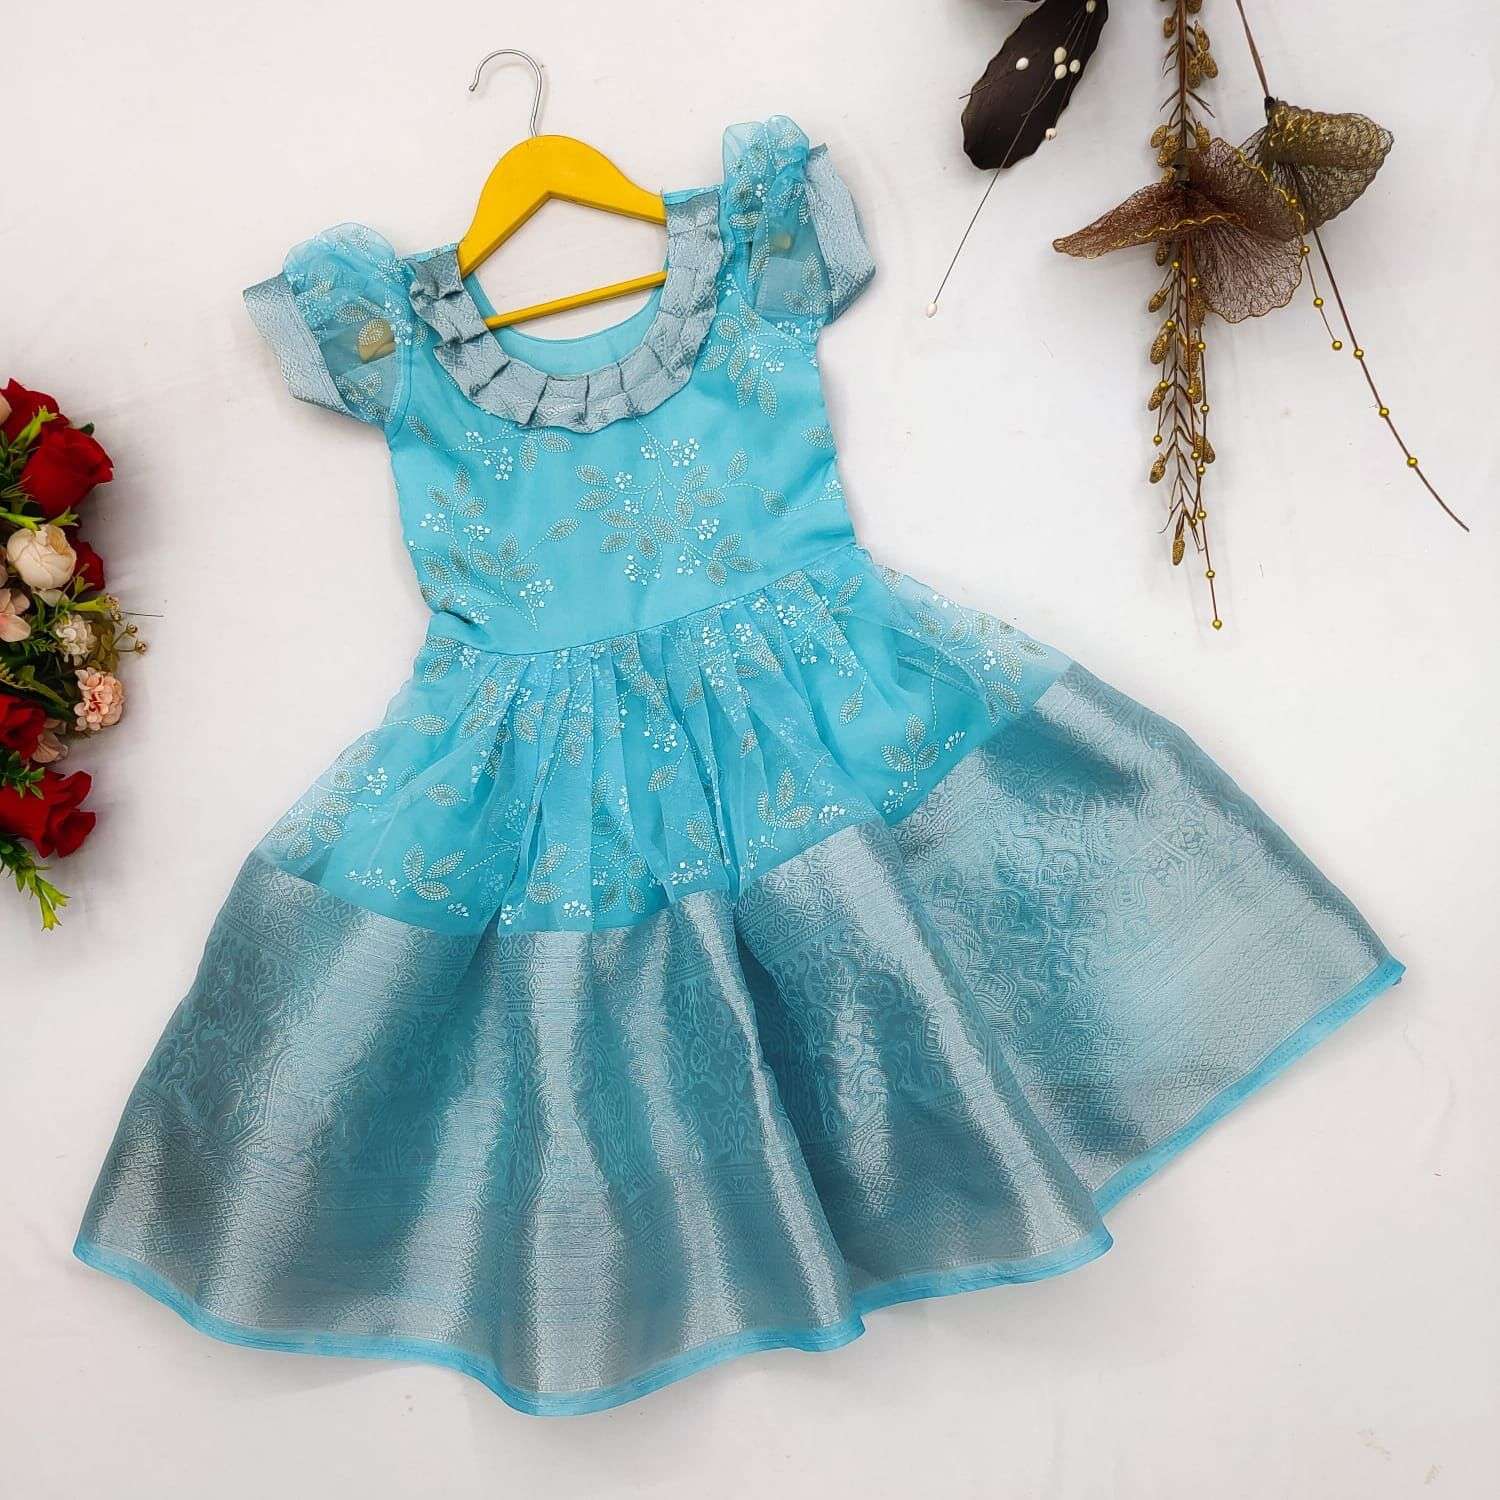 liitle girl kids wear kids girl beautifull 1 year to 18 year girl kids wear gown colletion mother n daughter same twinning gown collection